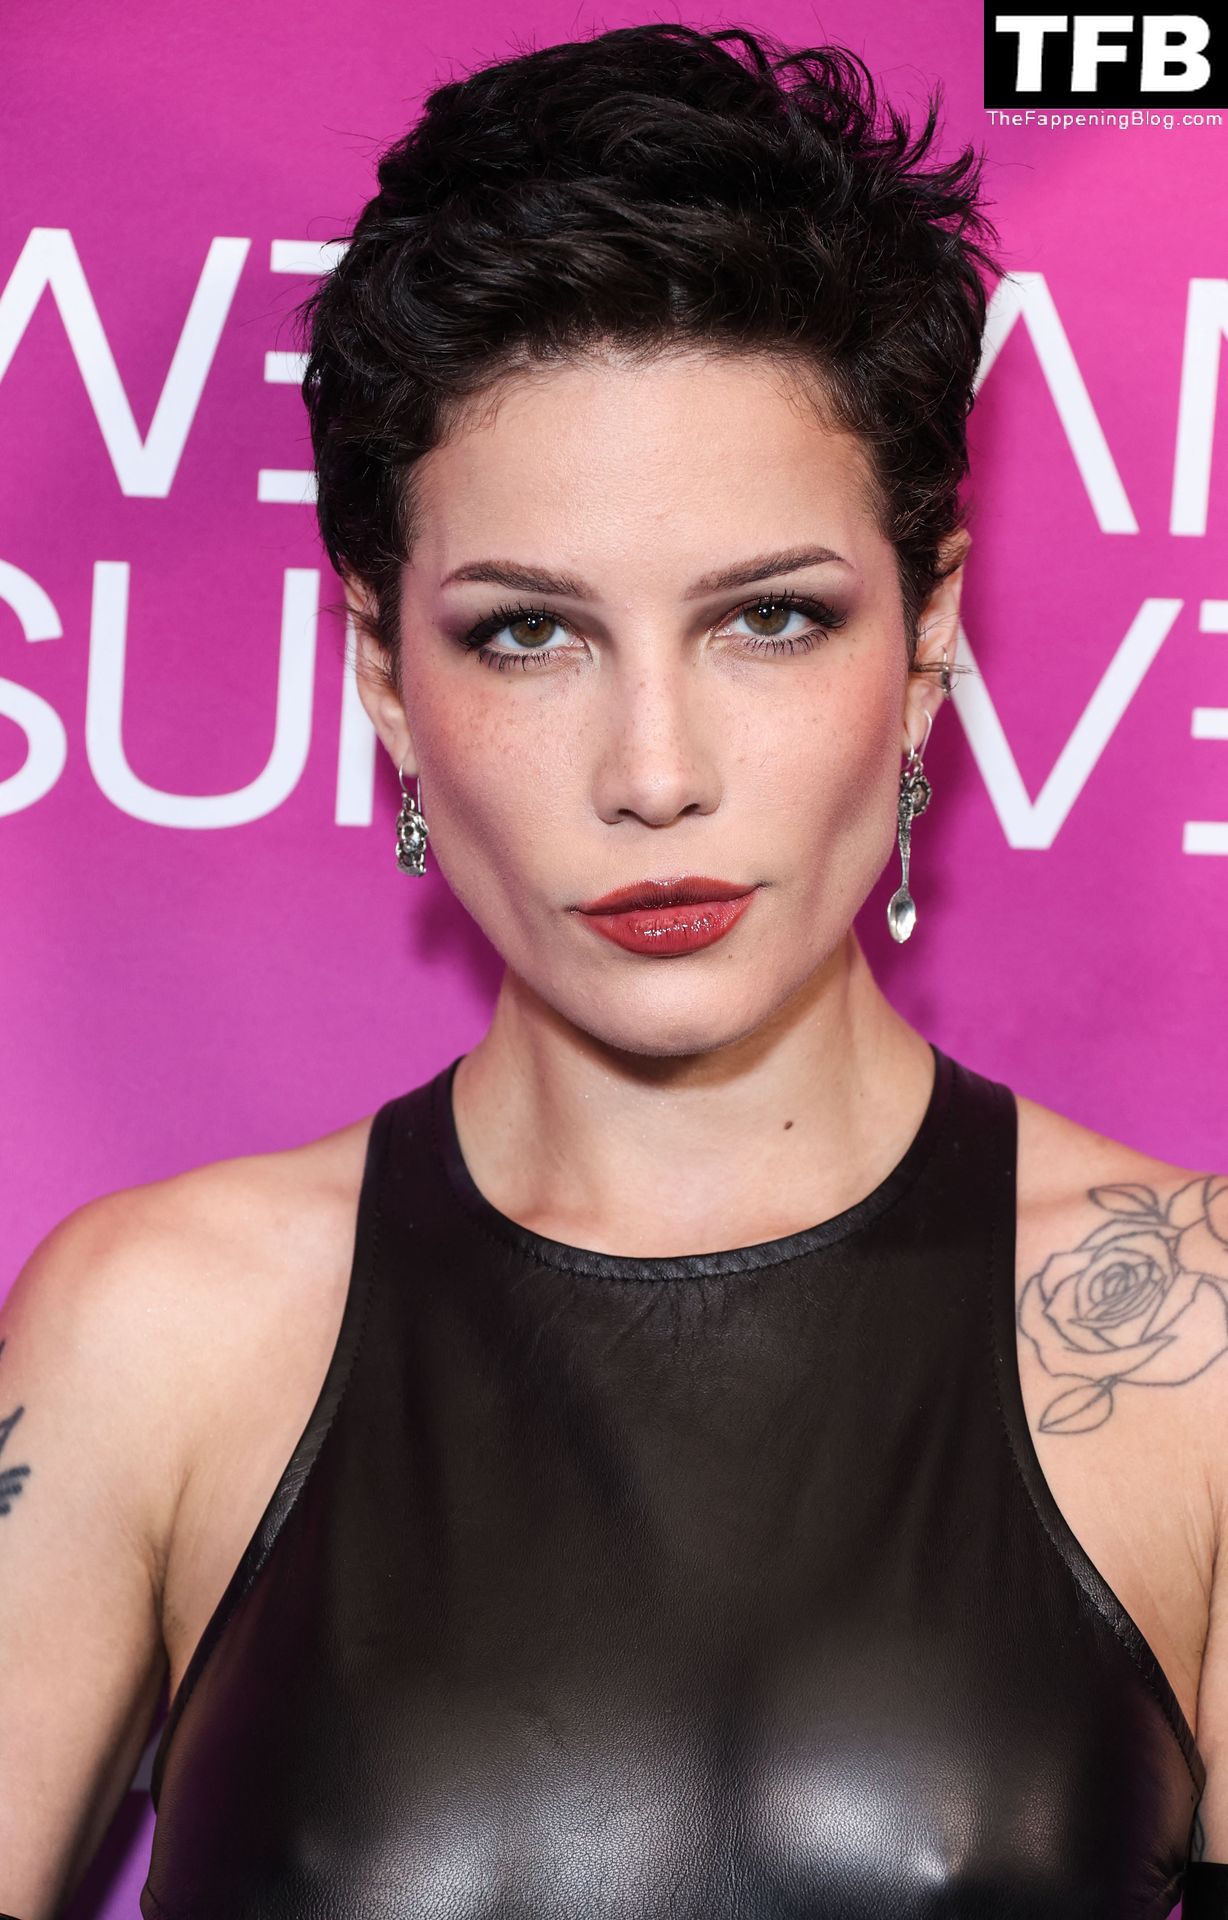 Halsey-Sexy-The-Fappening-Blog-7.jpg